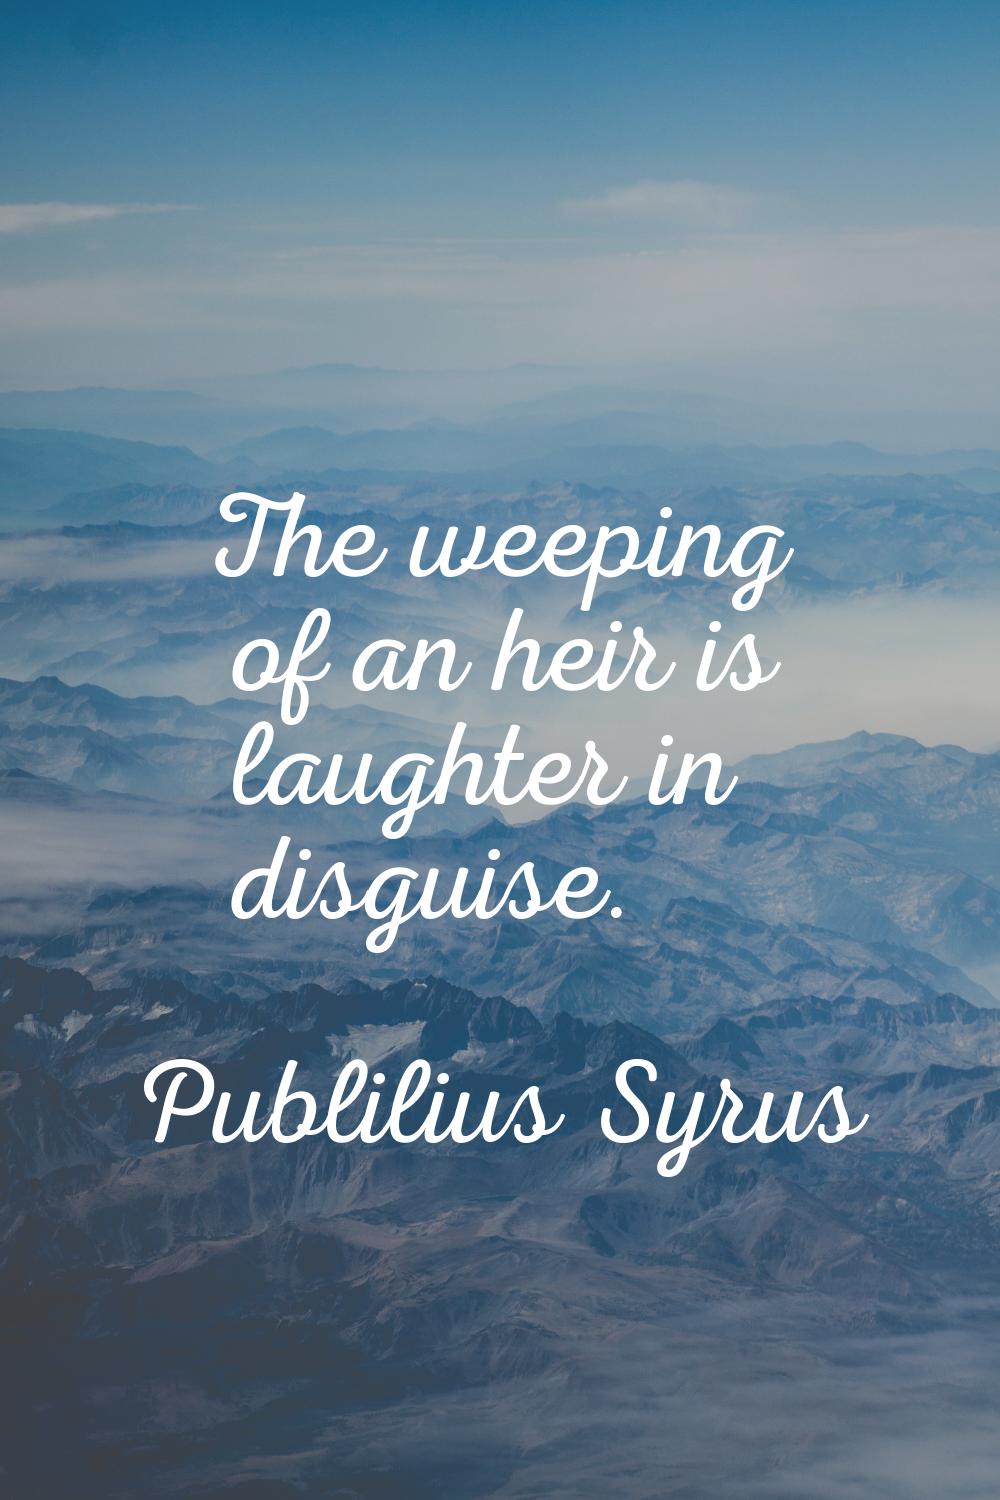 The weeping of an heir is laughter in disguise.